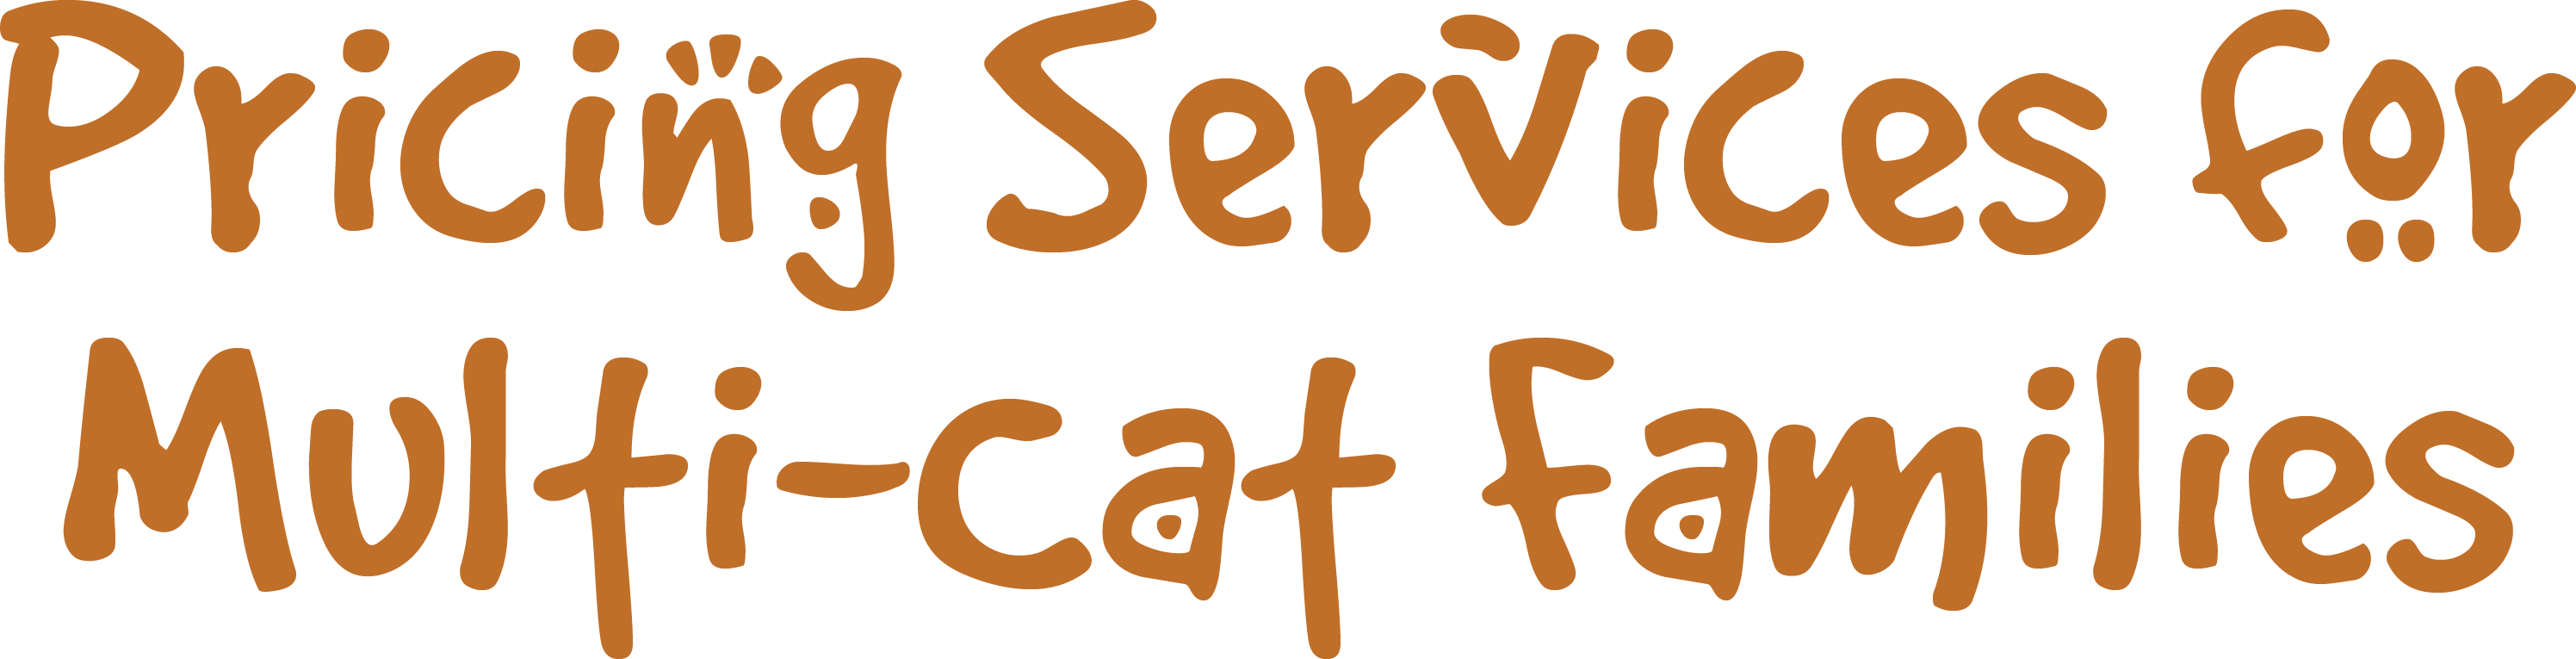 "Pricing Services for Multi-Cat Families"